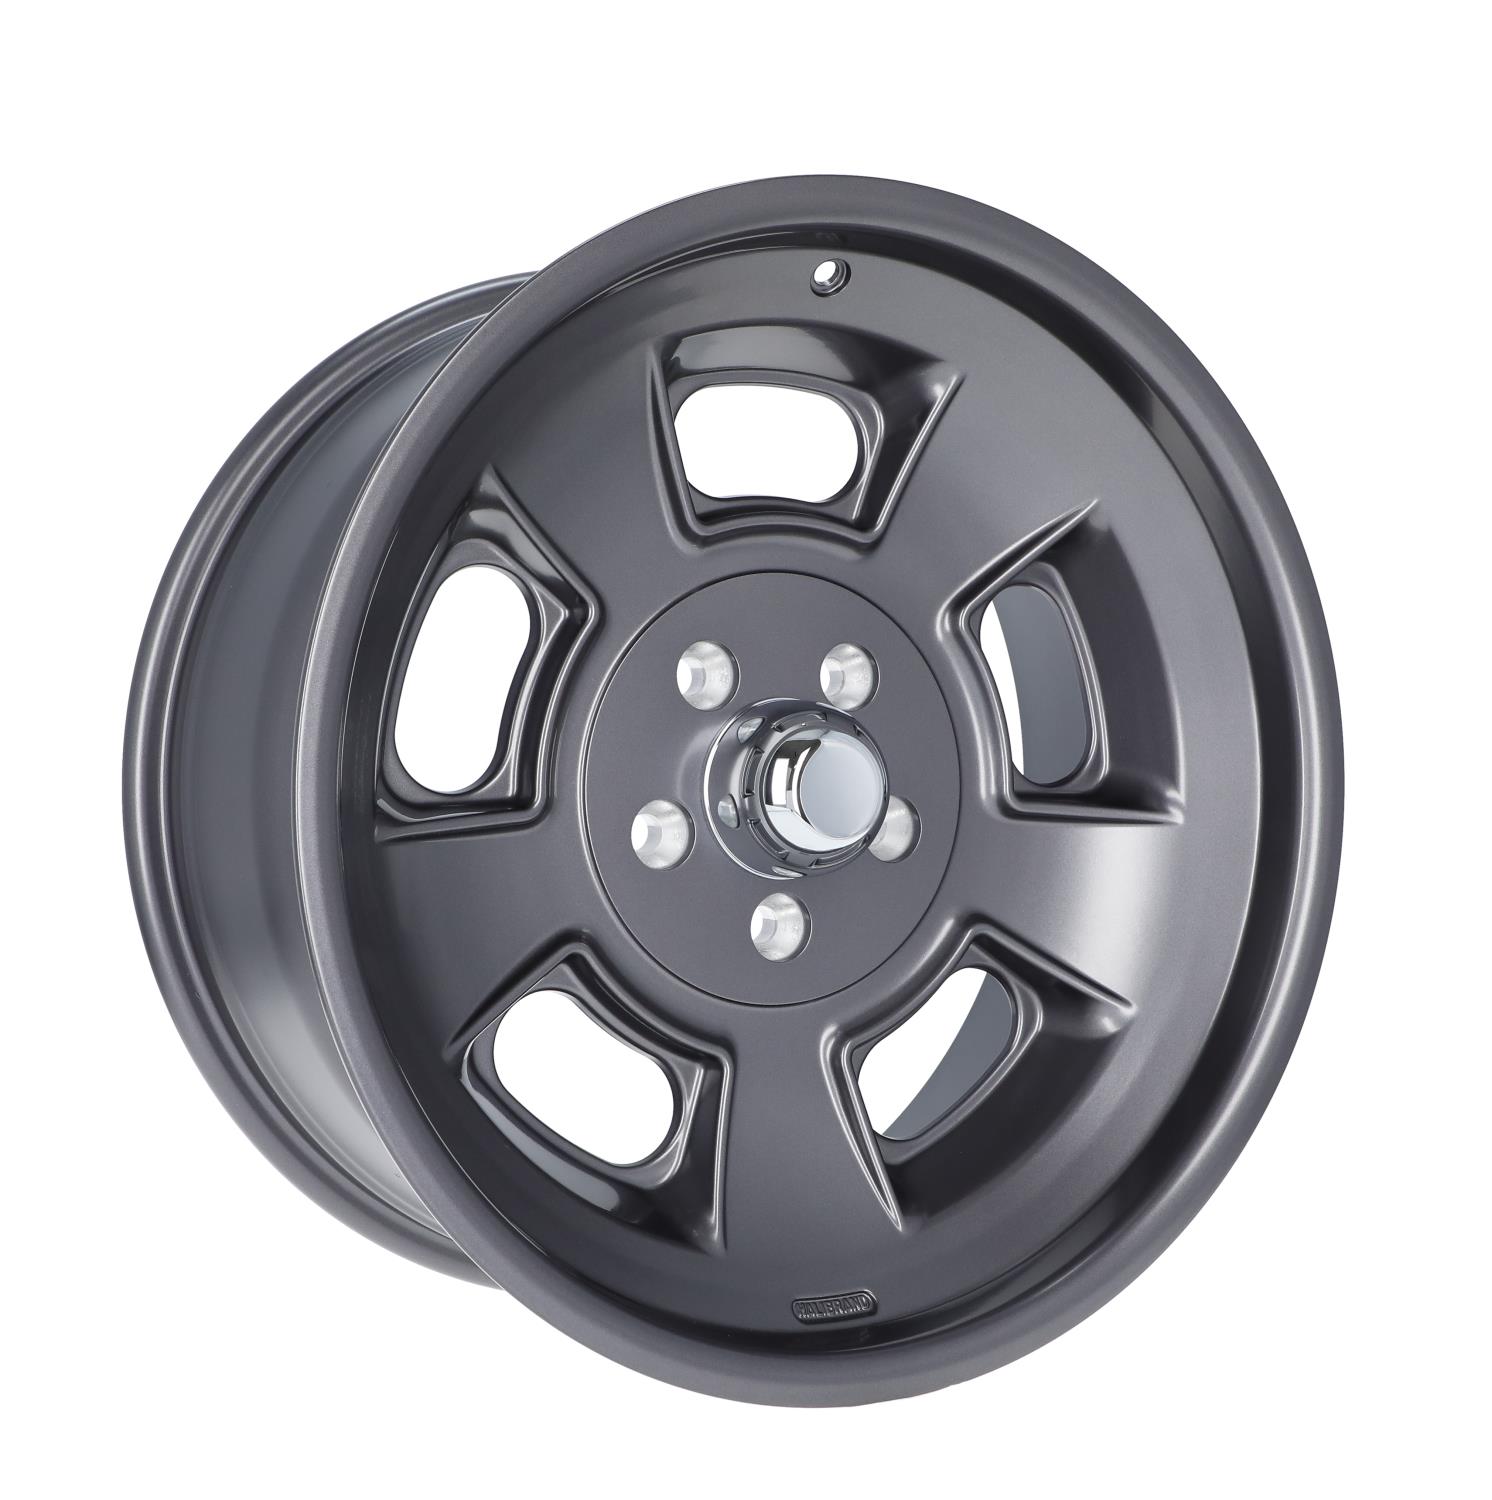 Sprint Front Wheel, Size: 19x8.5", Bolt Pattern: 5x5", Backspace: 4.75" [Anthracite - Semi Gloss Clearcoat]